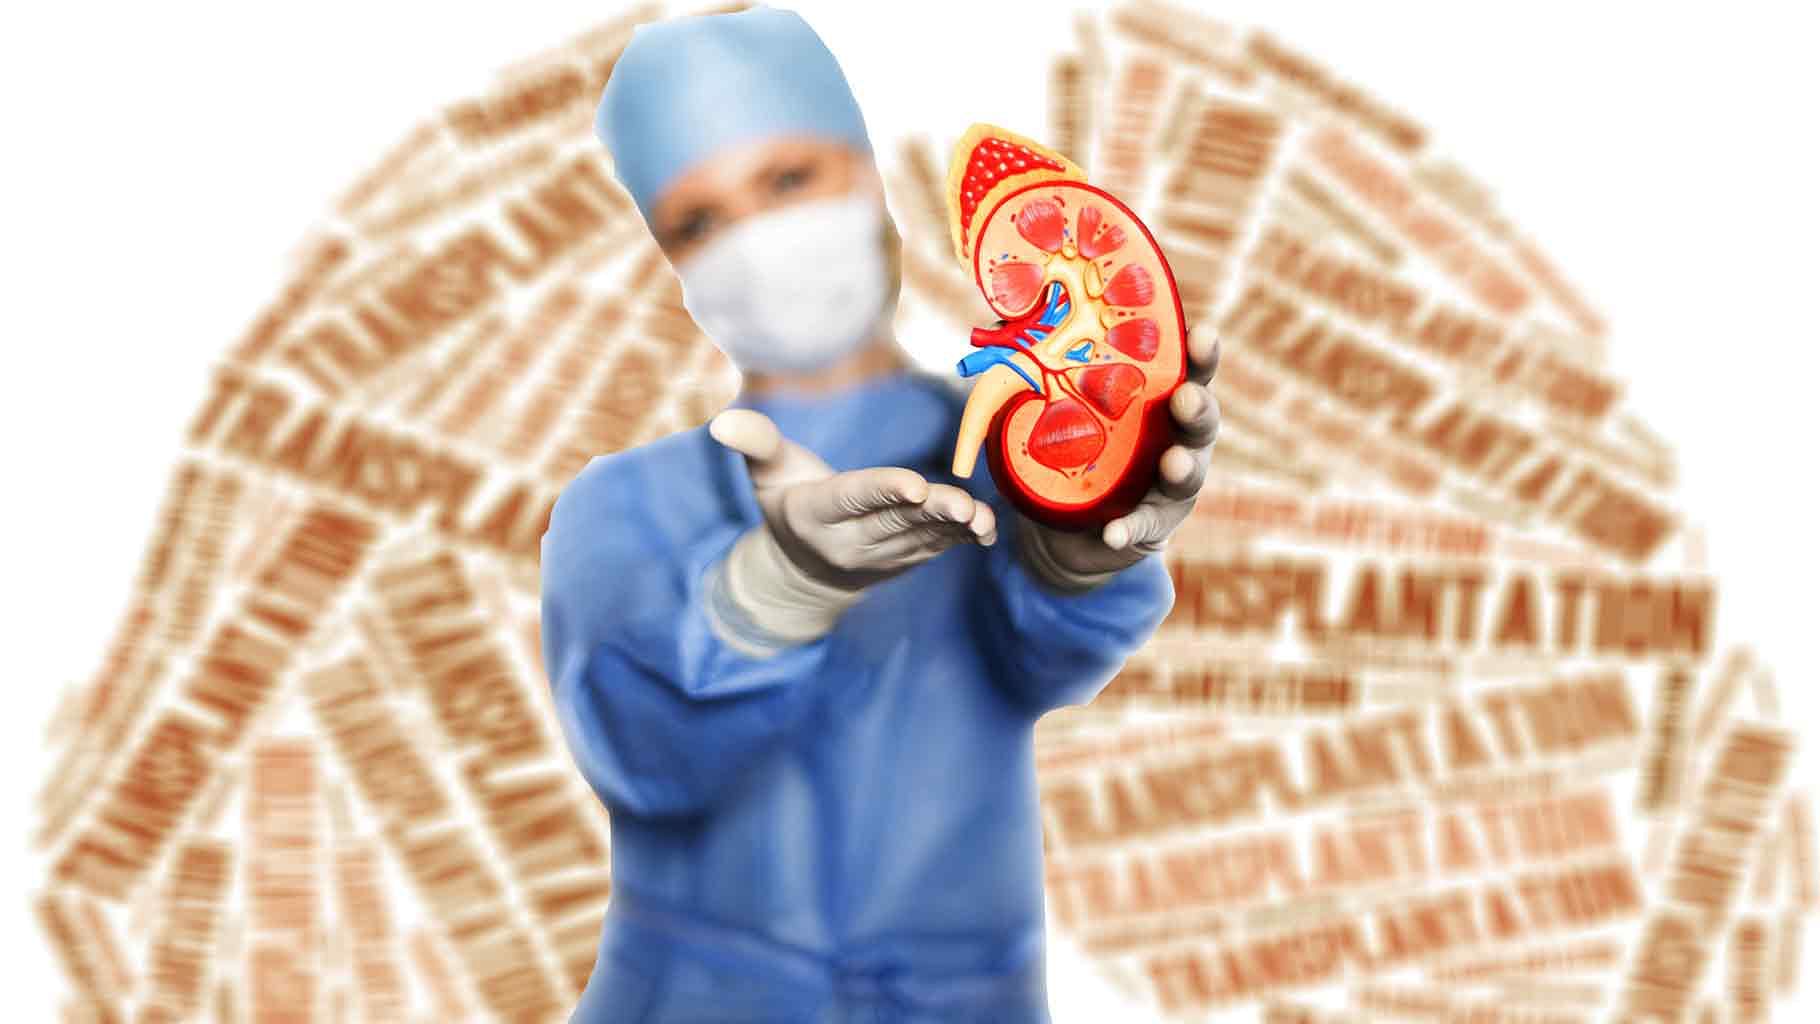  1 in 5000 patients in India on the waitlist actually gets an organ. The sad part is that around only 1 to 2% of Indians donate their organs in comparison to nearly 80% in the West - to streamline this acute  gap, the Health Ministry has come up with new kidney donation guidelines Photo: iStock altered by <i>The Quint</i>)